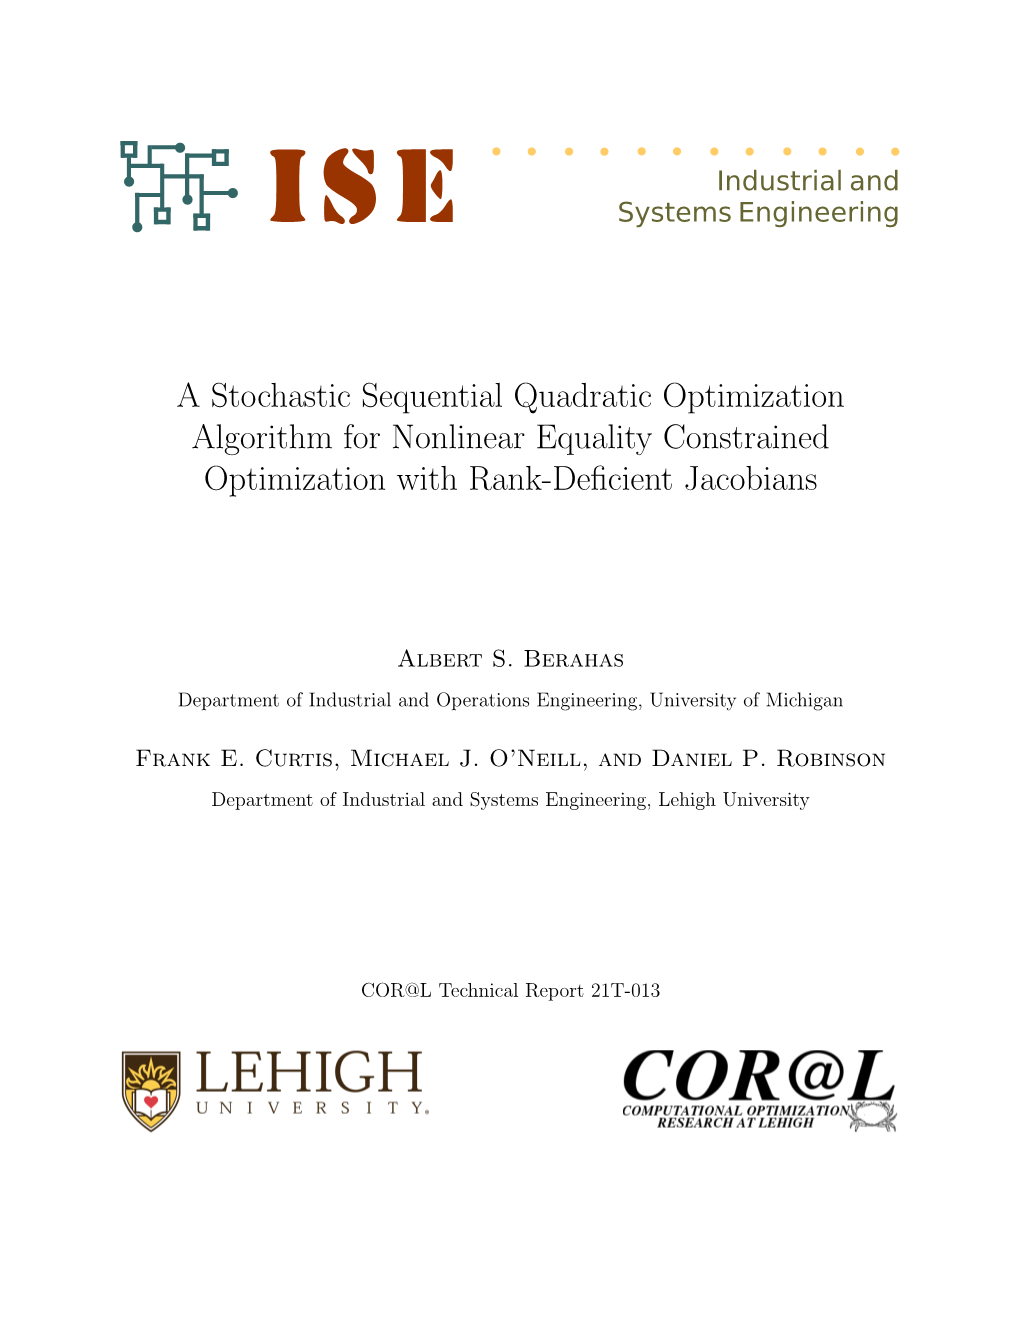 A Stochastic Sequential Quadratic Optimization Algorithm for Nonlinear Equality Constrained Optimization with Rank-Deﬁcient Jacobians